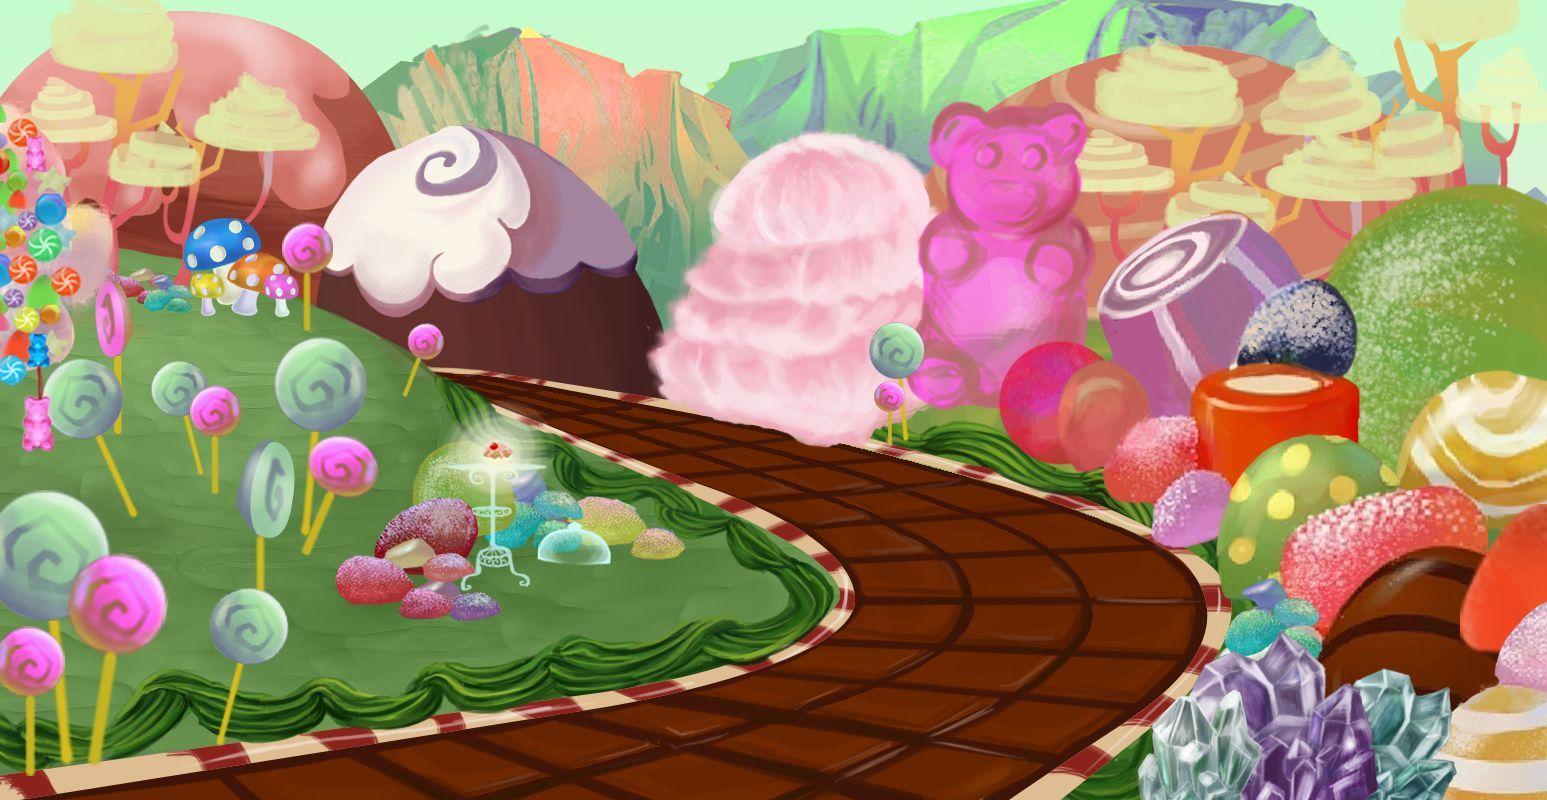 candyland background for my production class. Art